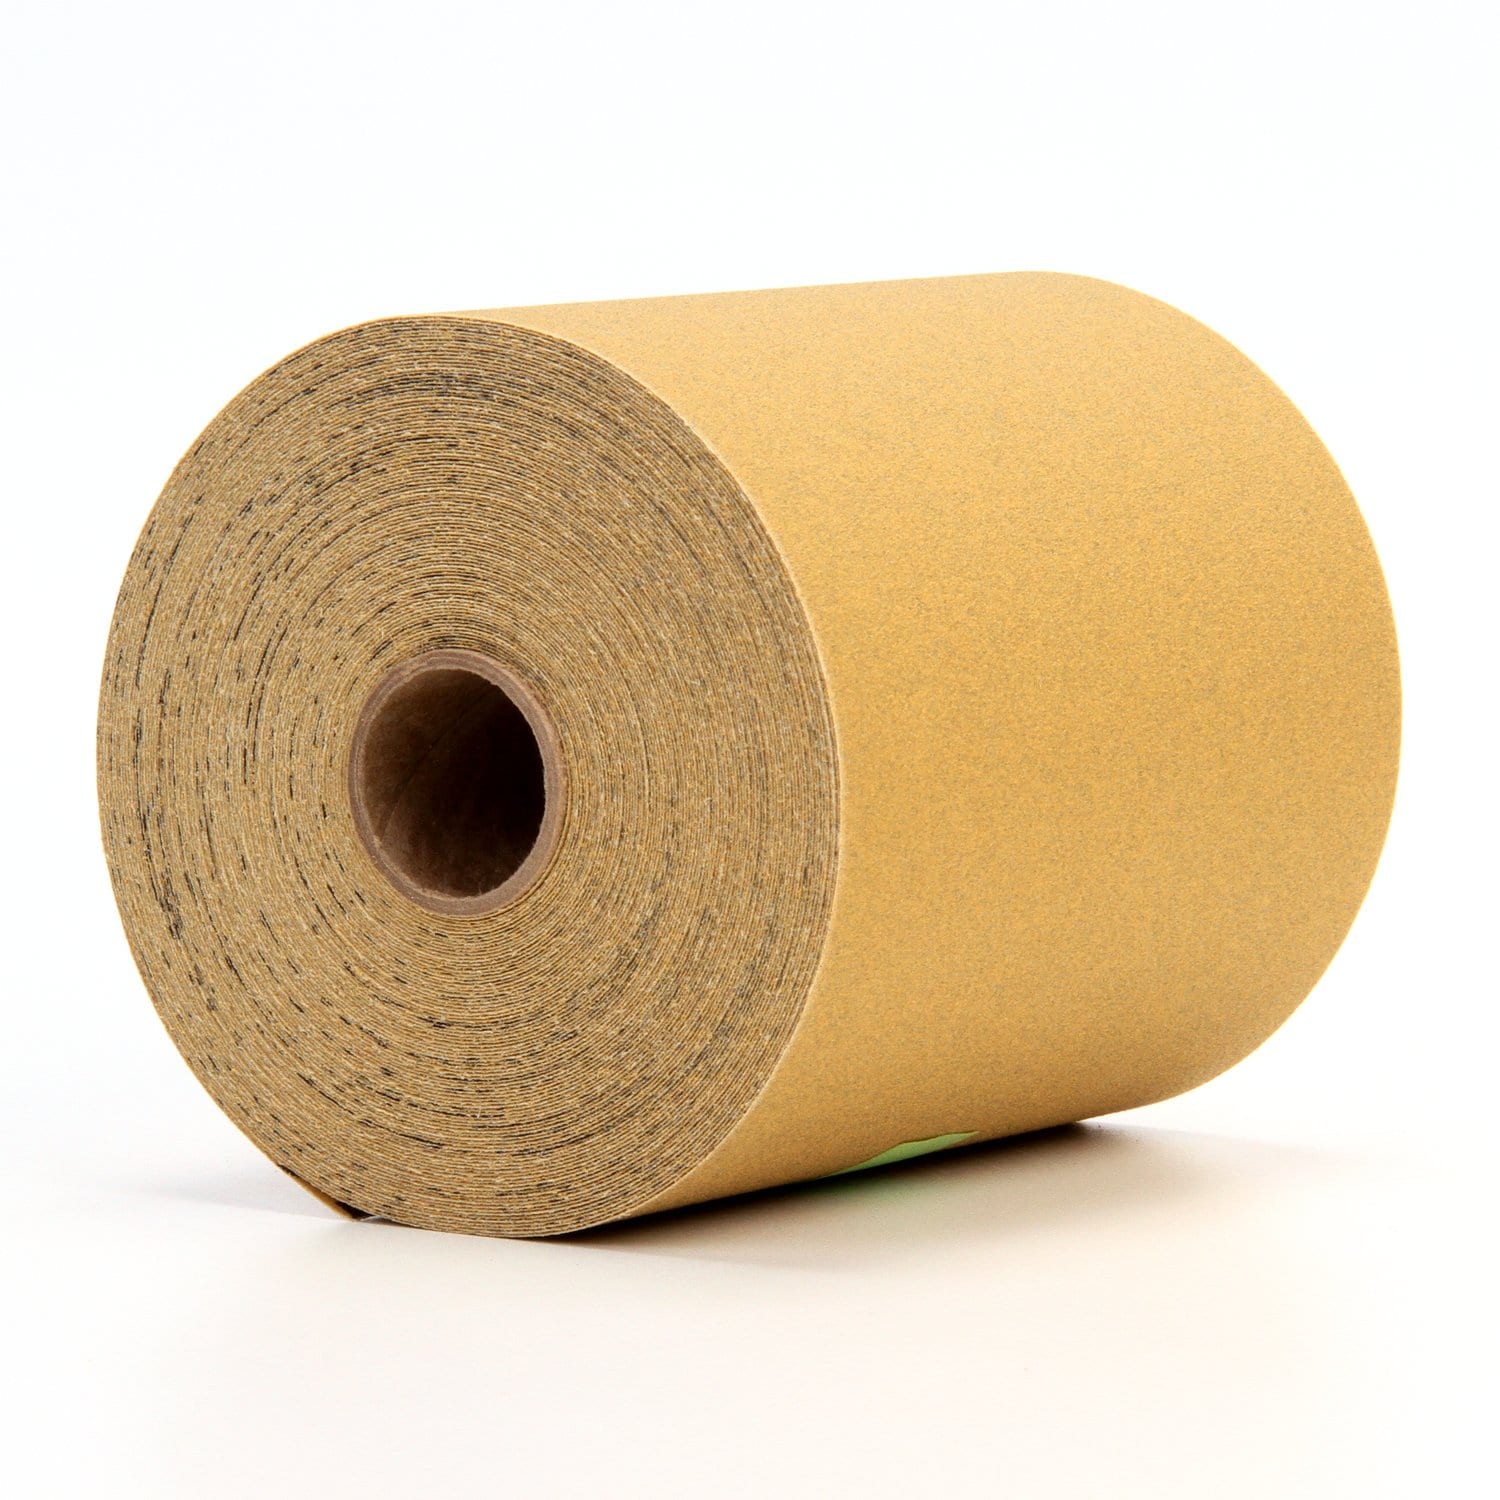 7100070005 - 3M Stikit Paper Roll 236U, P320 C-weight, Config